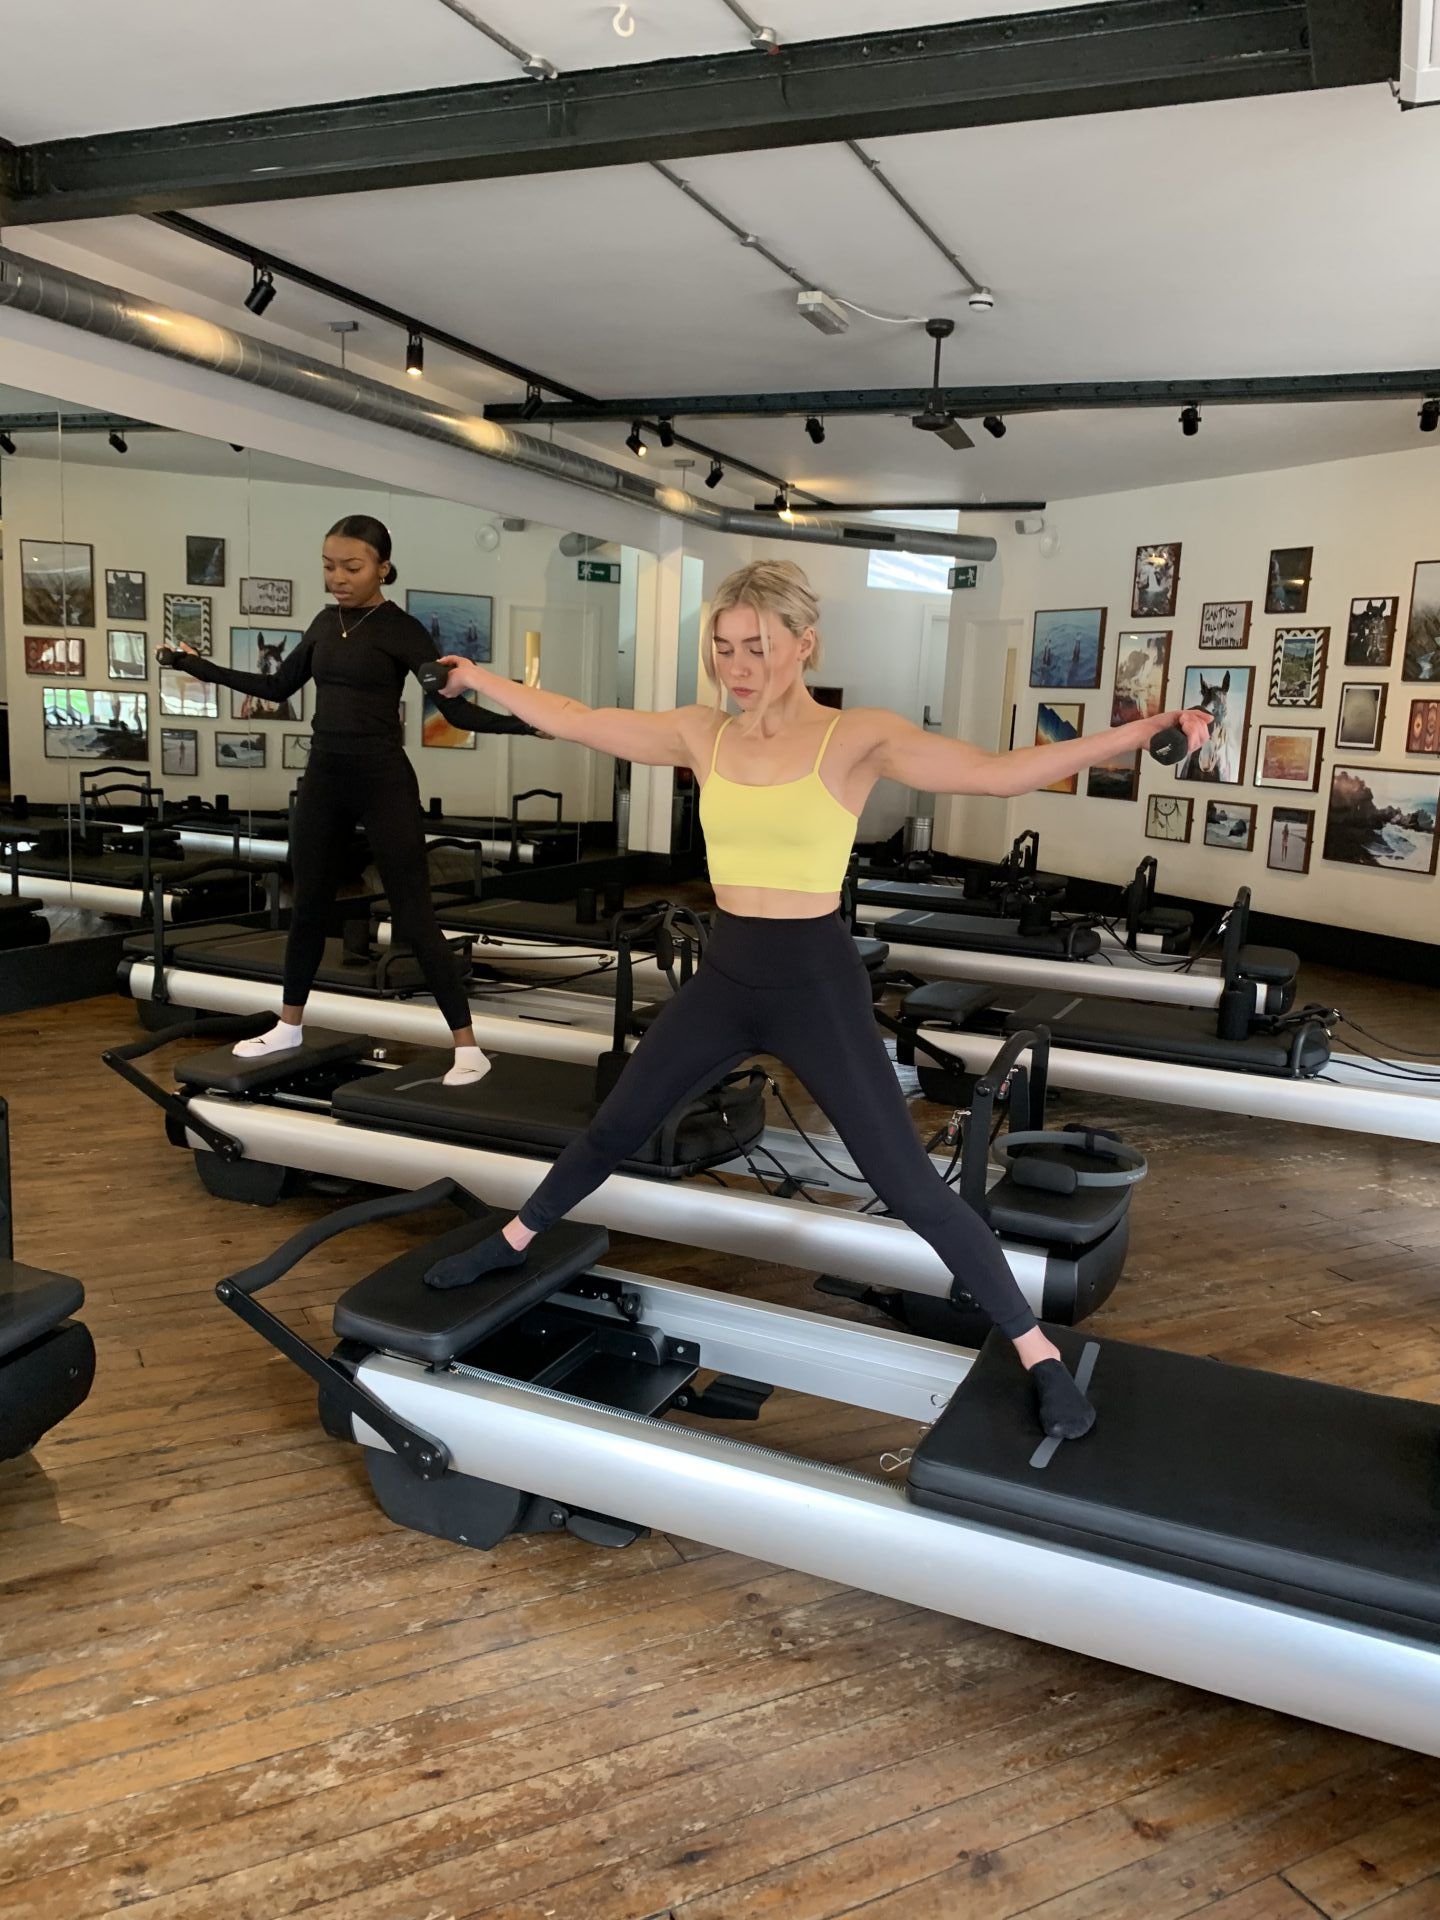 Pilates Reformer Classes - What is best, Classic or Dynamic?